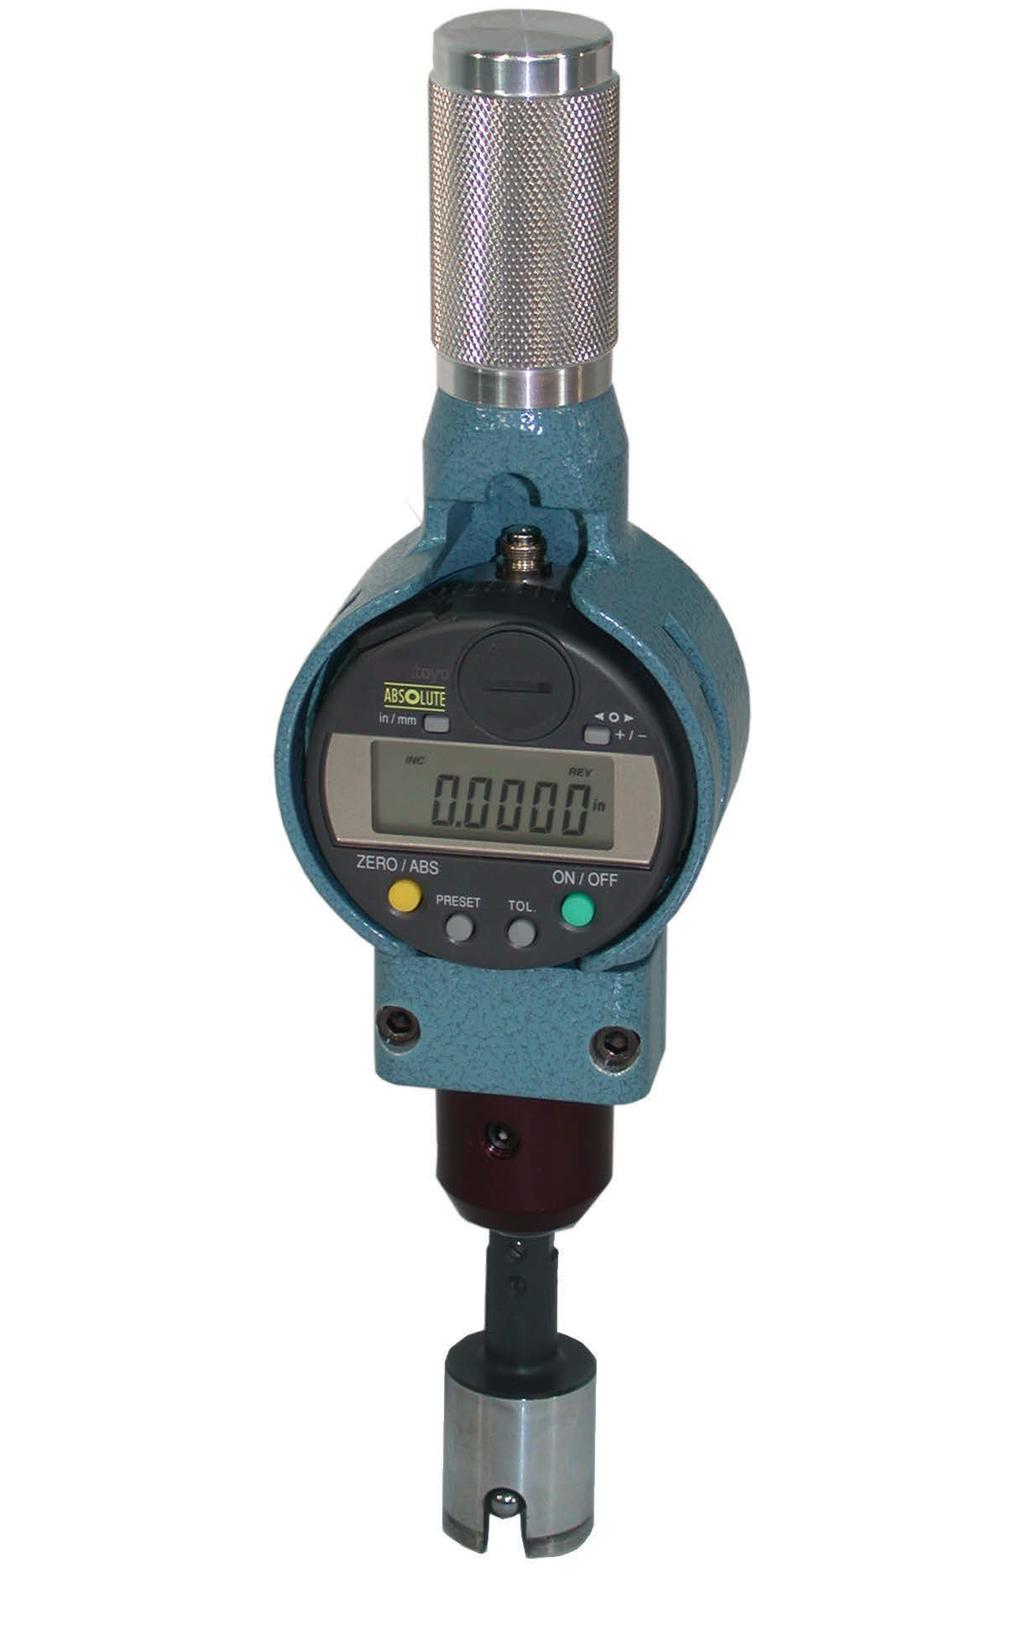 I.D. Indicating Plug Gage Dorsey s indicating plug gages are used for repetitive bore measurement applications where extreme accuracy is important.